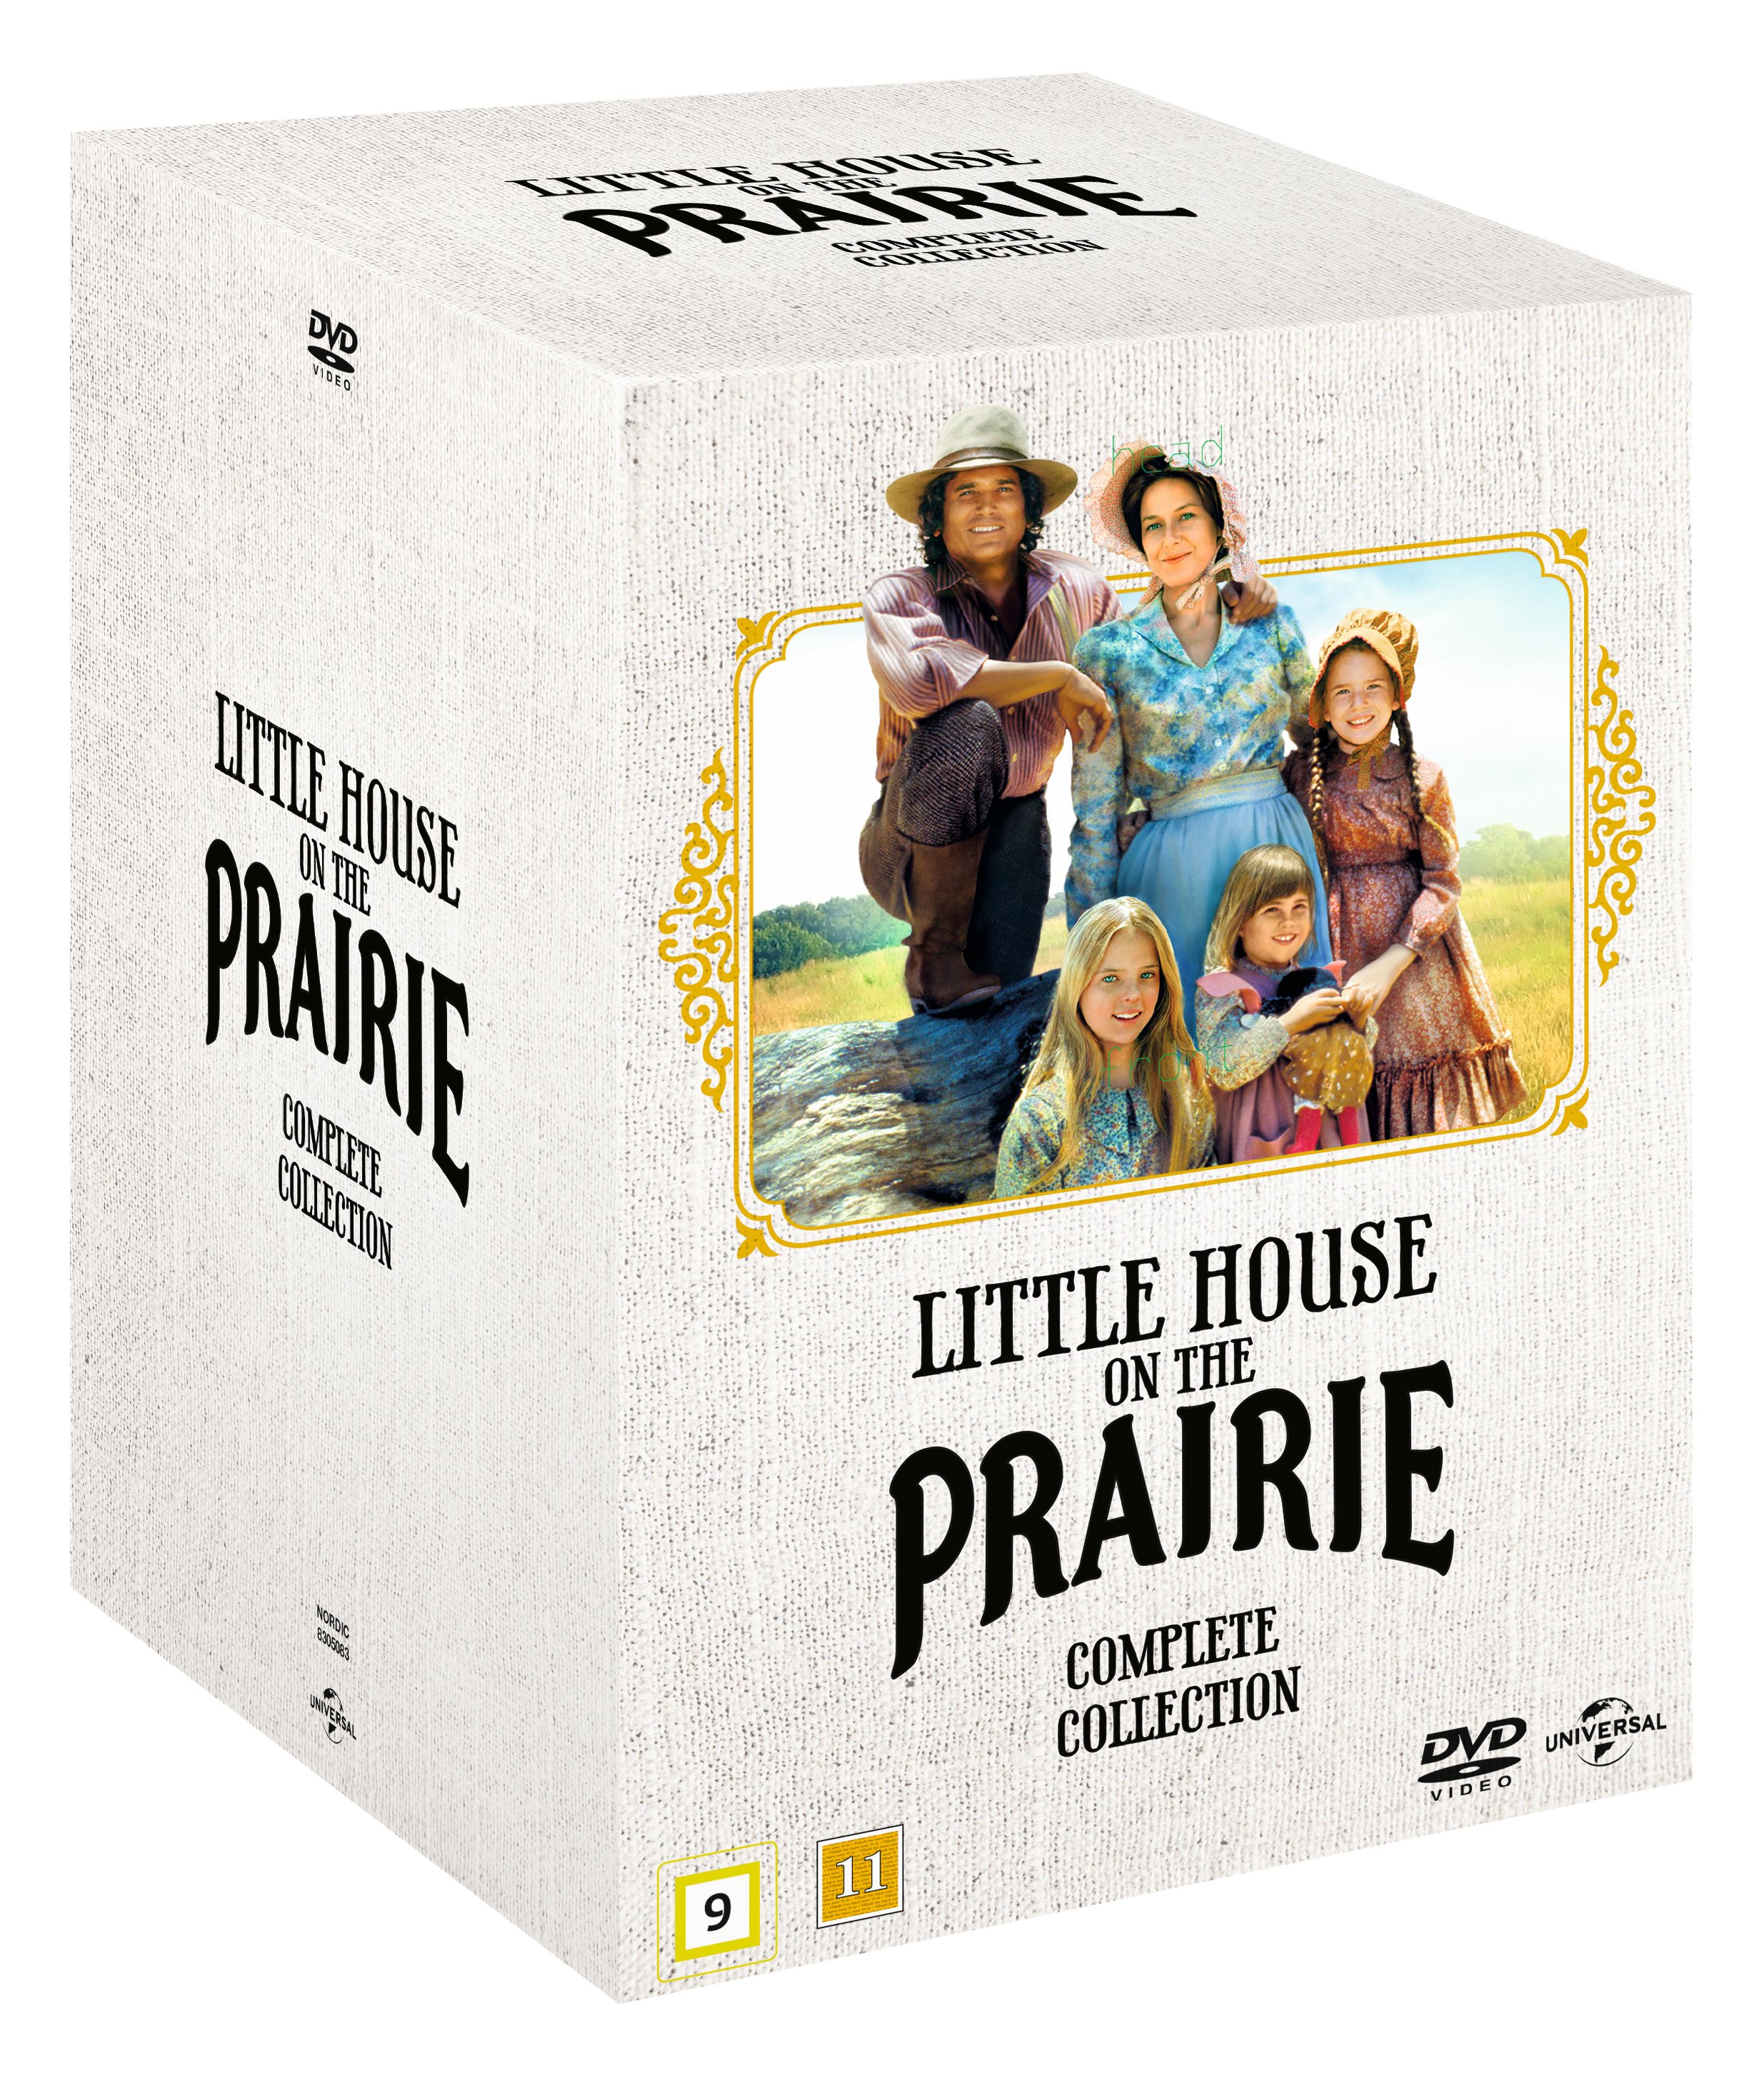 little house on the prairie complete series deluxe remastered